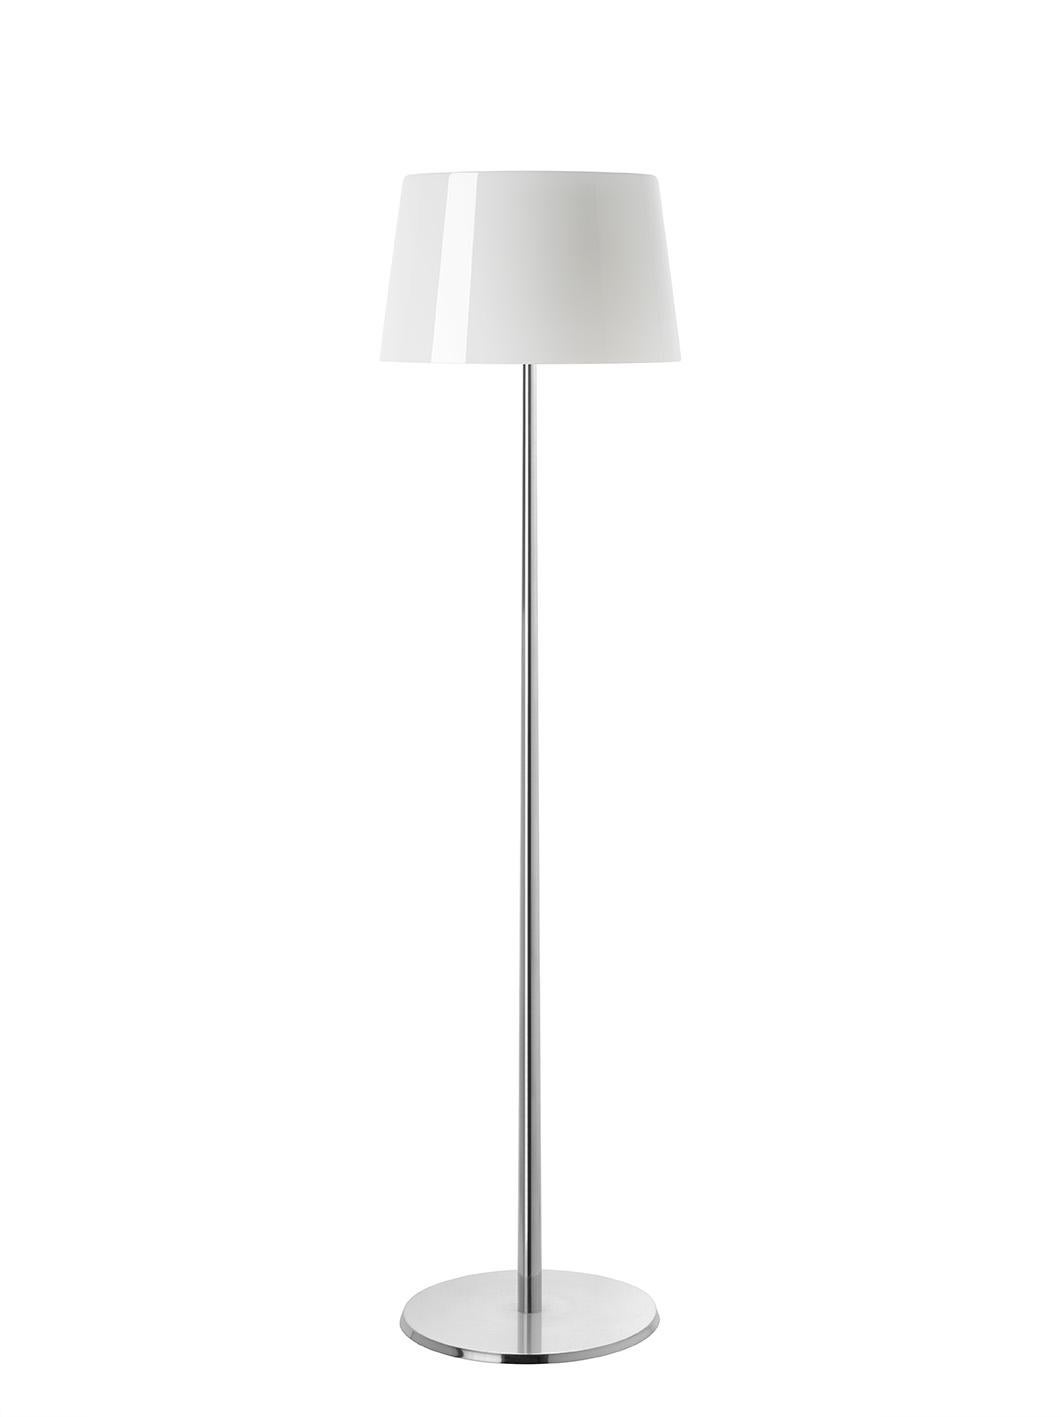 Floor lamp (reading lamp) with direct and diffused light. Hand blown cased glass diffuser with glossy and finish, white on the inside and colored on the outside. Die cast aluminum base and stem is hand and finished and polished, liquid painted in